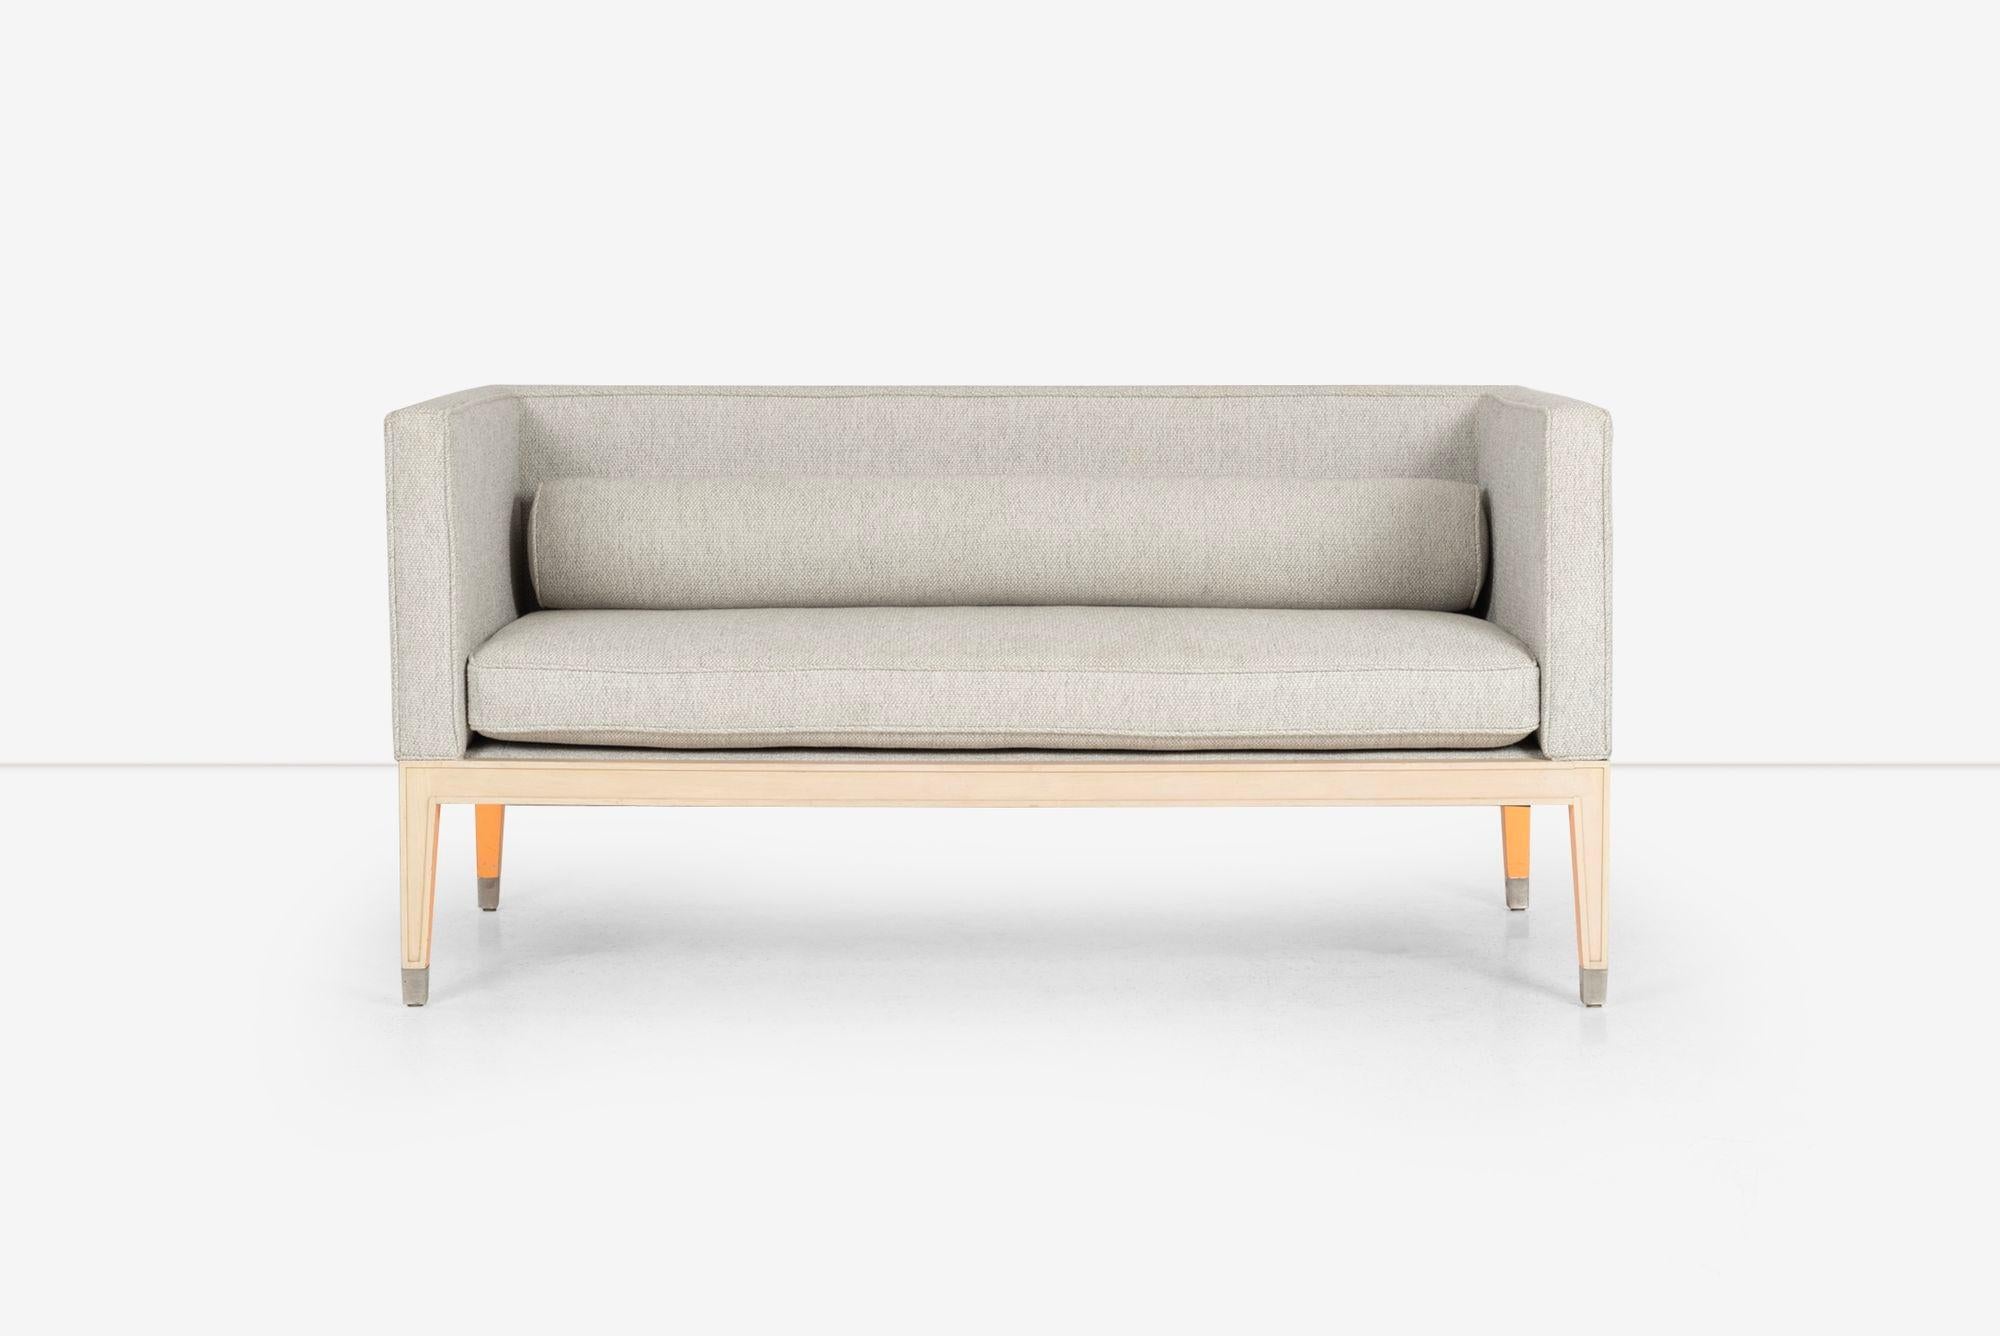 Phillipe Starck Sofa from The Clift Hotel San Fransisco
Wood frame with chrome feet caps and fluorescent detail on each leg.
Reupholstered with cotton-poly fabric and bolster
Dimensions:
66